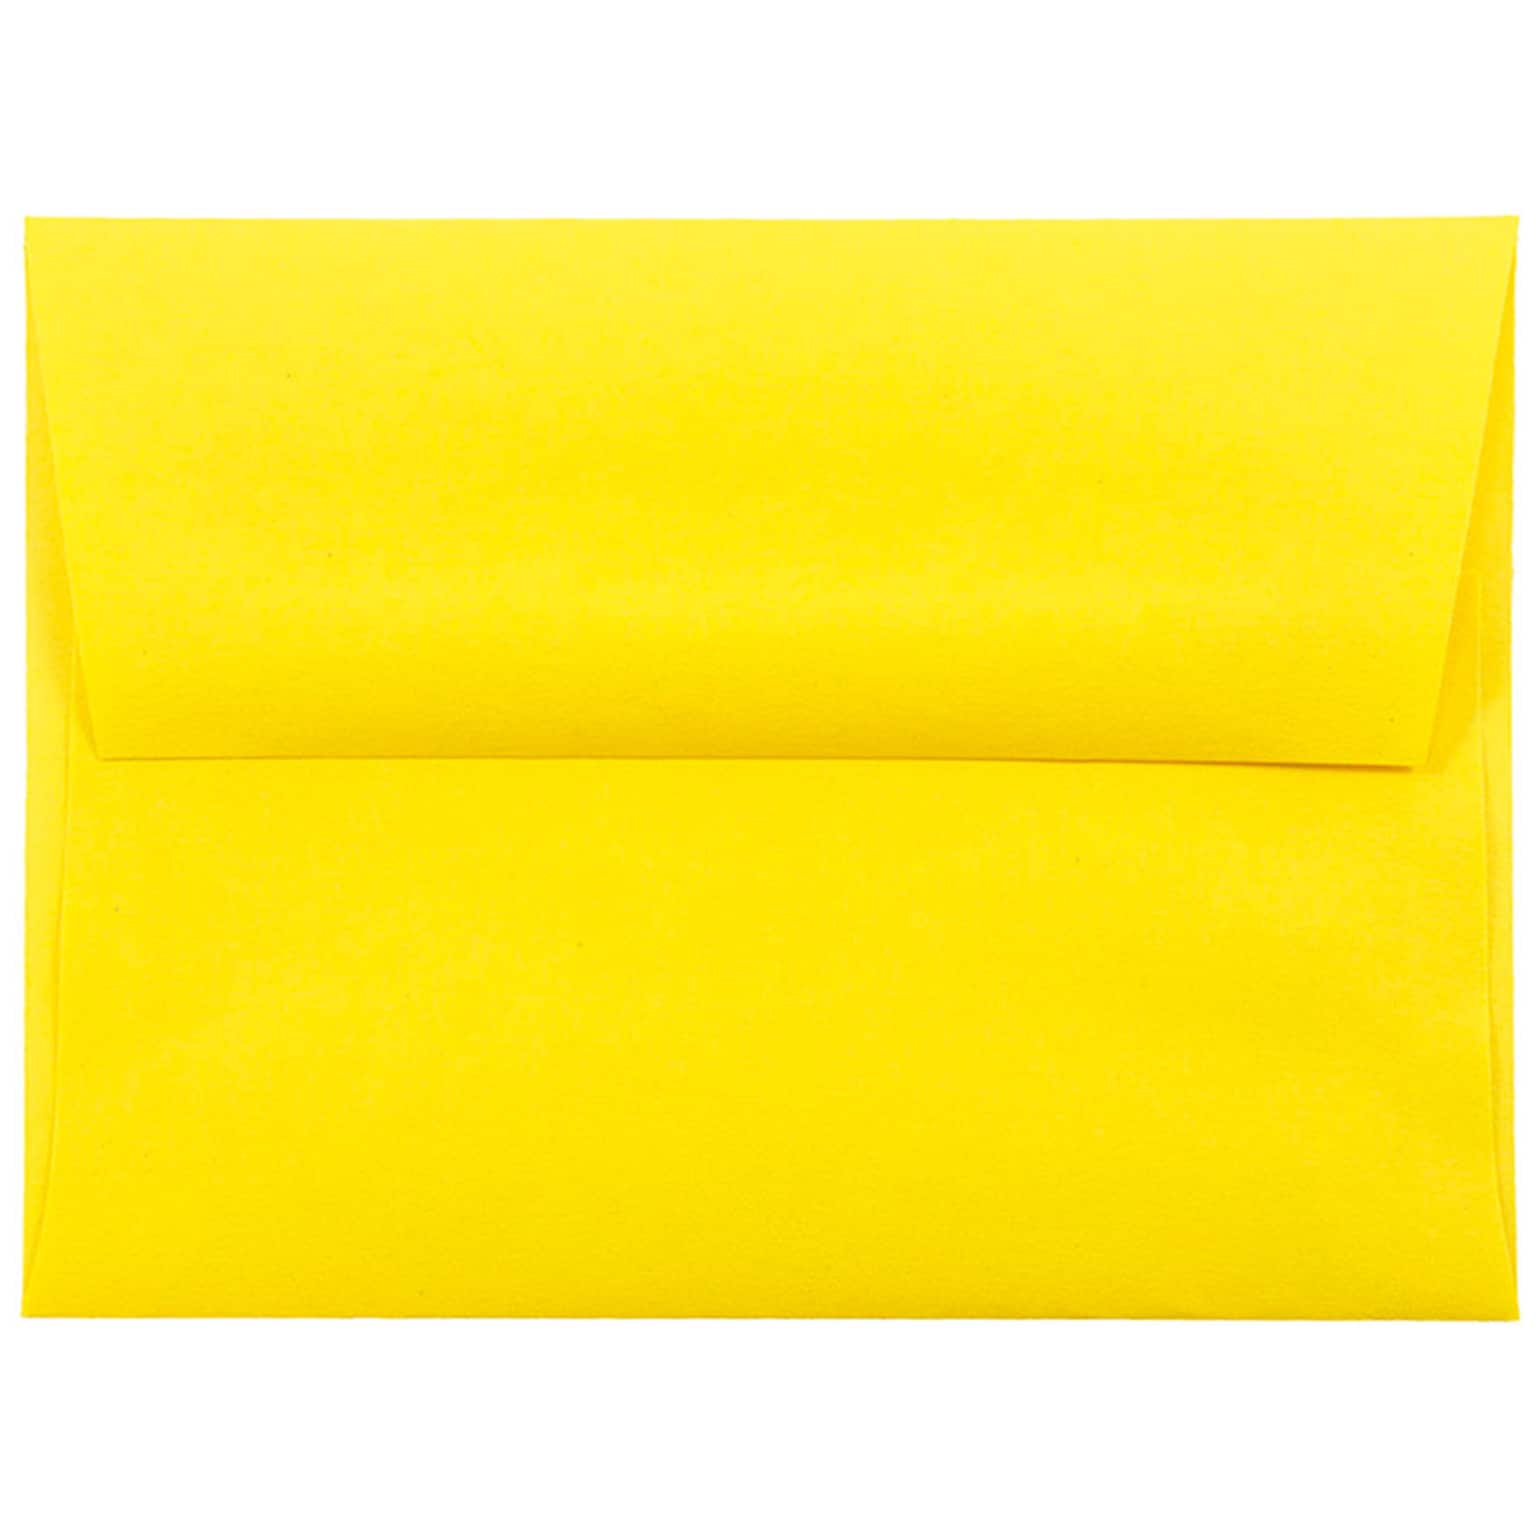 JAM Paper A2 Colored Invitation Envelopes, 4.375 x 5.75, Yellow Recycled, 50/Pack (15839I)